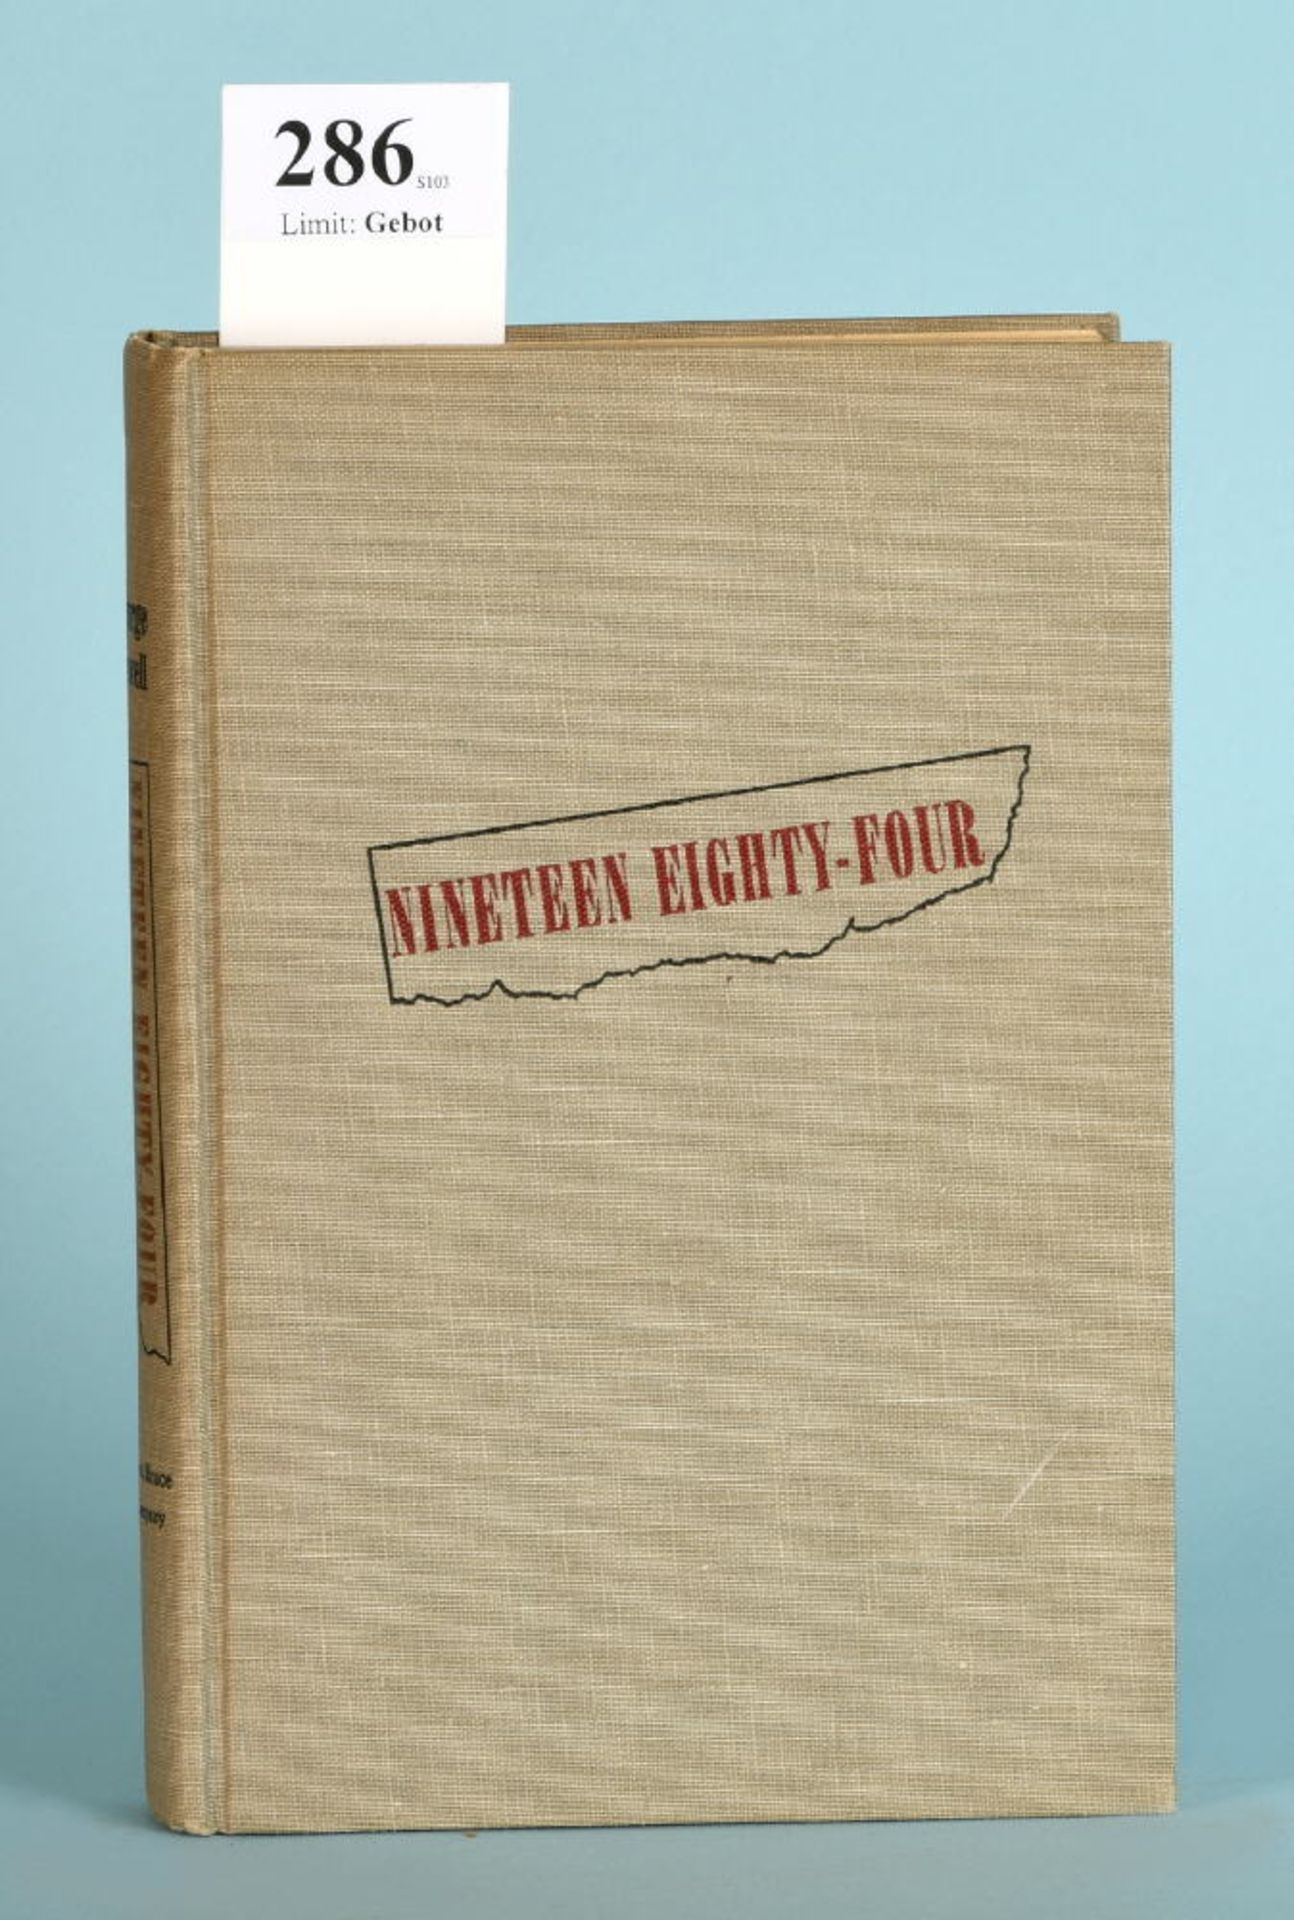 Orwell, George "Nineteen eighty-four"engl. Sprache, 314 S., bei Harcourt, Brace and Co., New York,